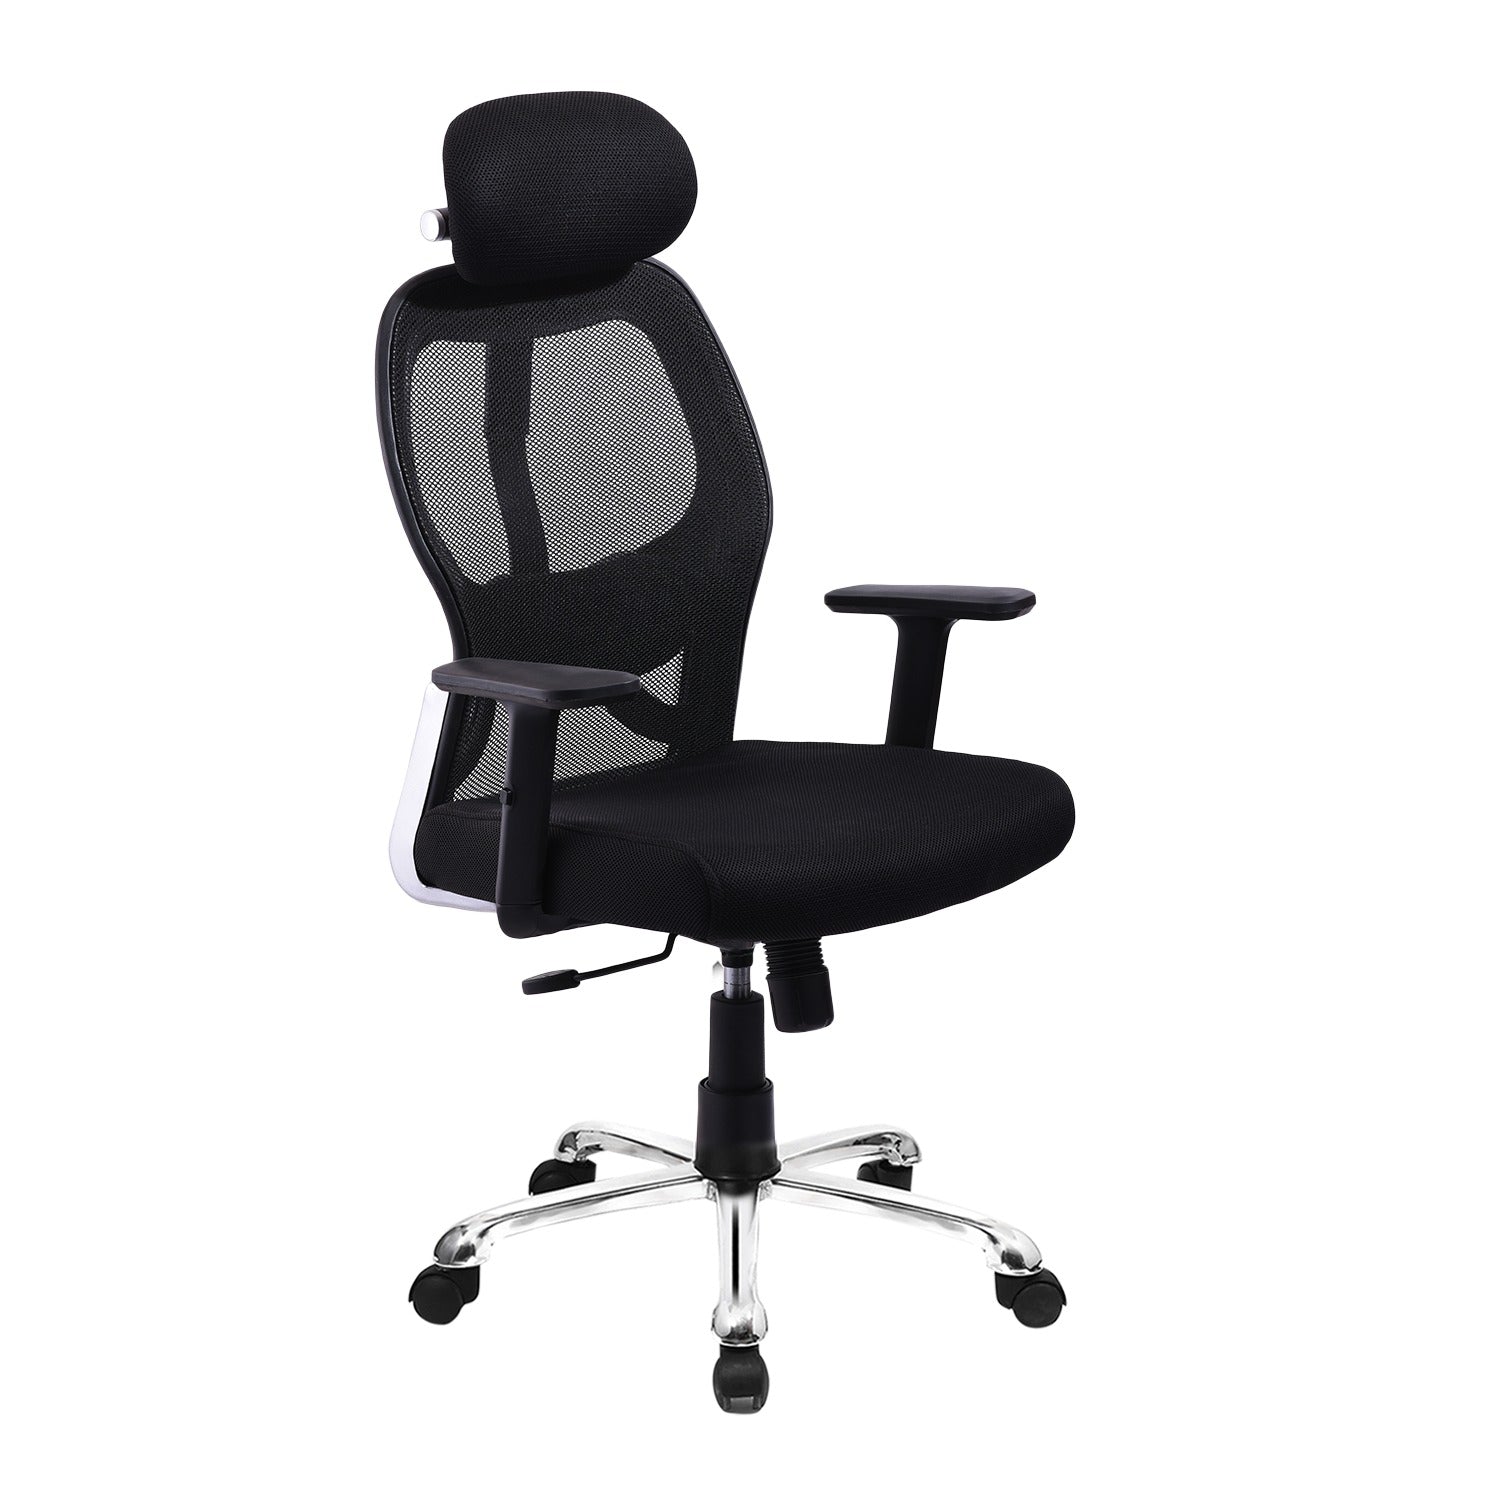 ZSM1045 High Back Chair by Zorin in Black Color Zorin